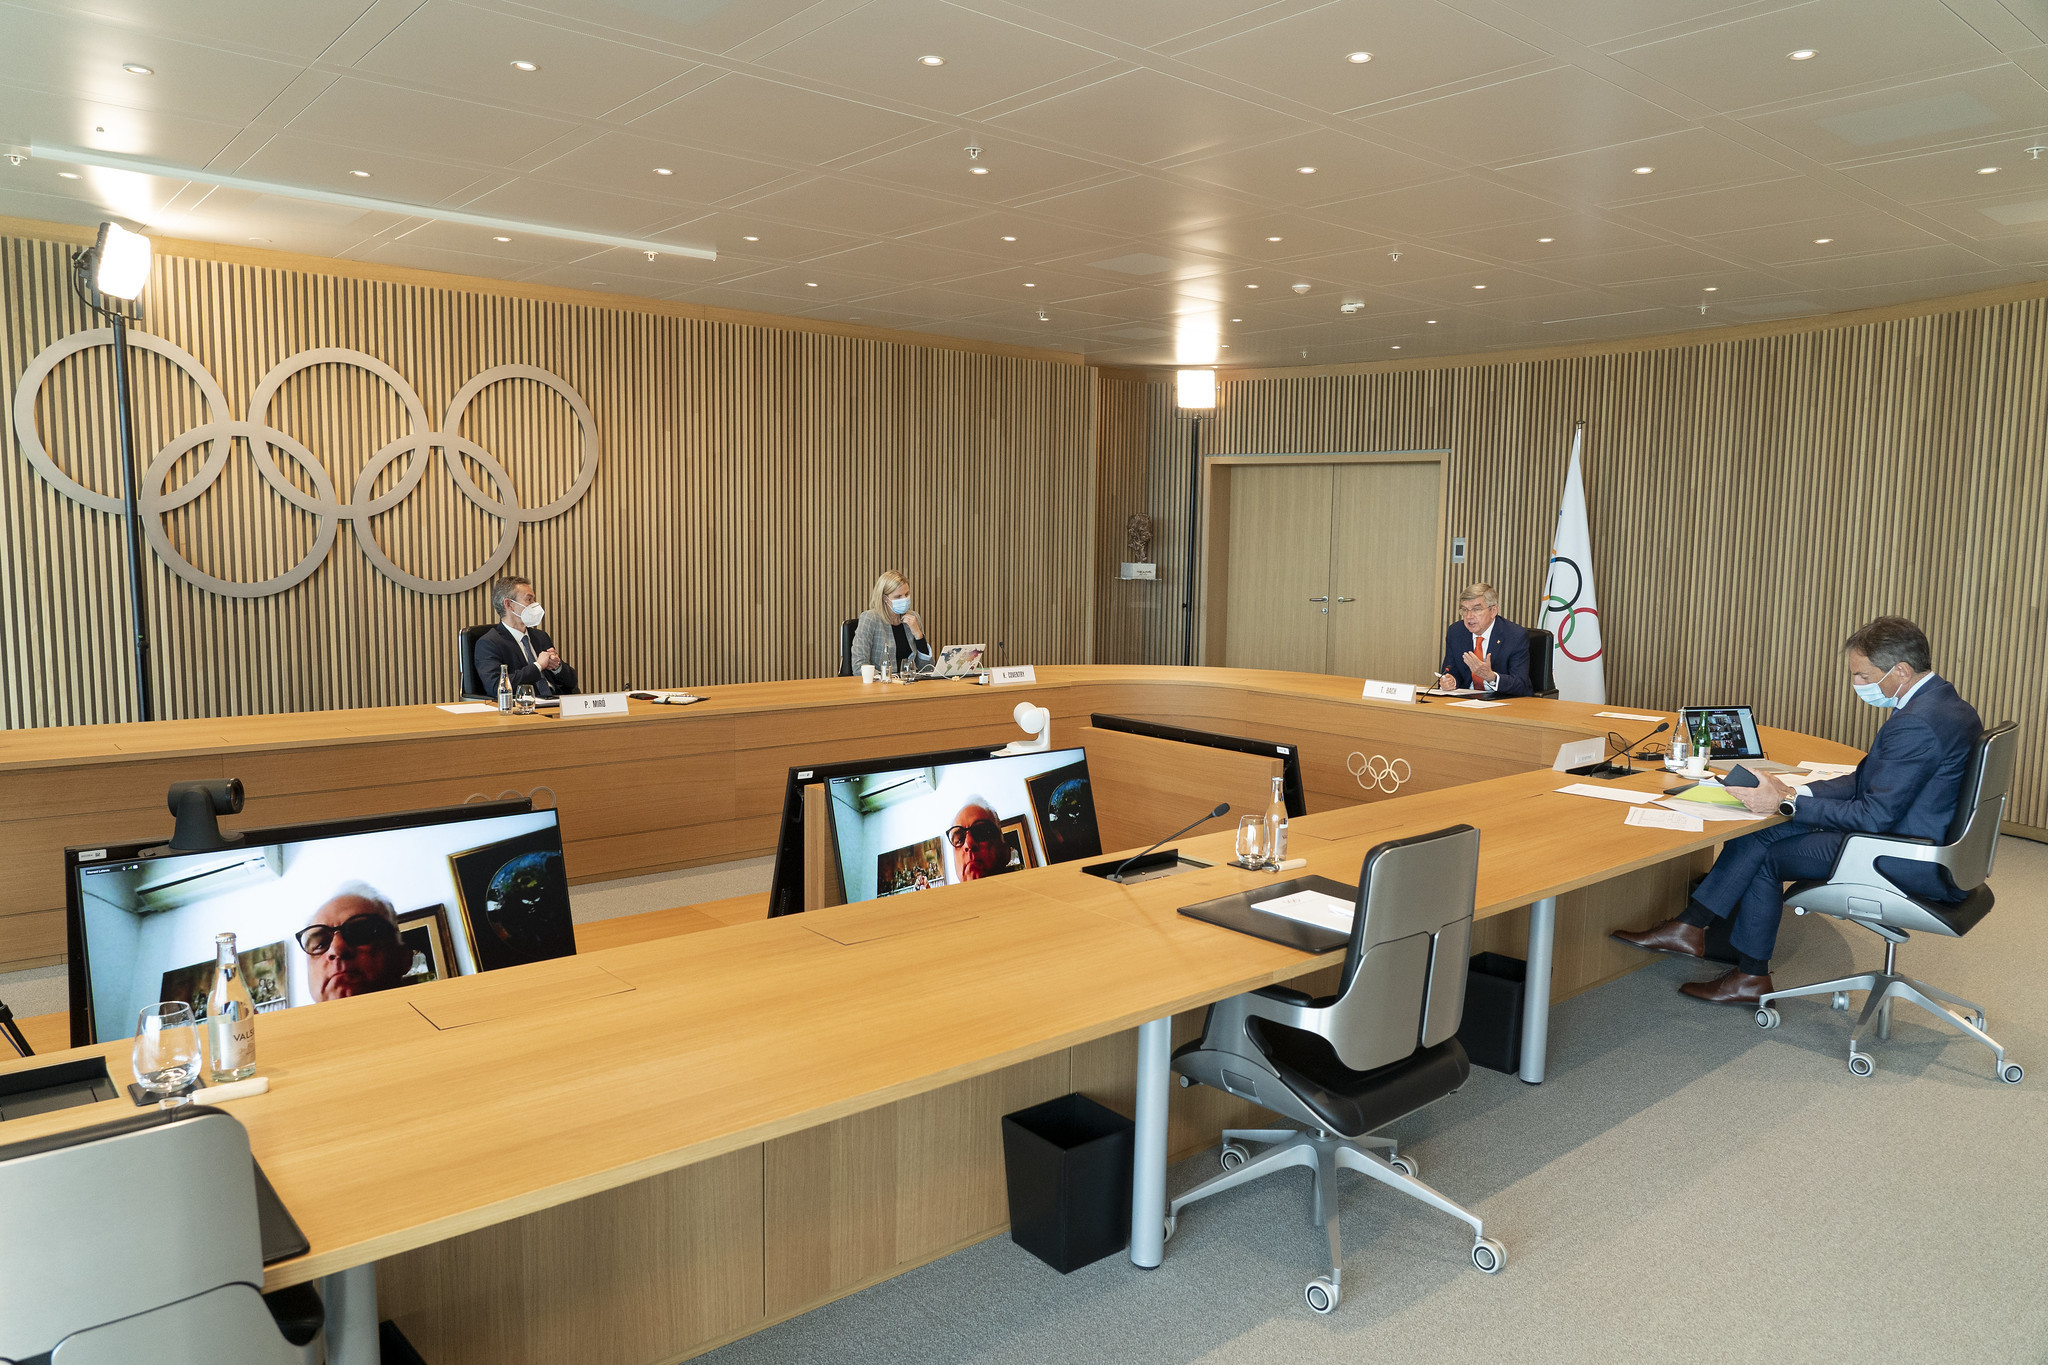 The IOC Executive Board endorsed the Olympic motto change proposed by Thomas Bach ©IOC